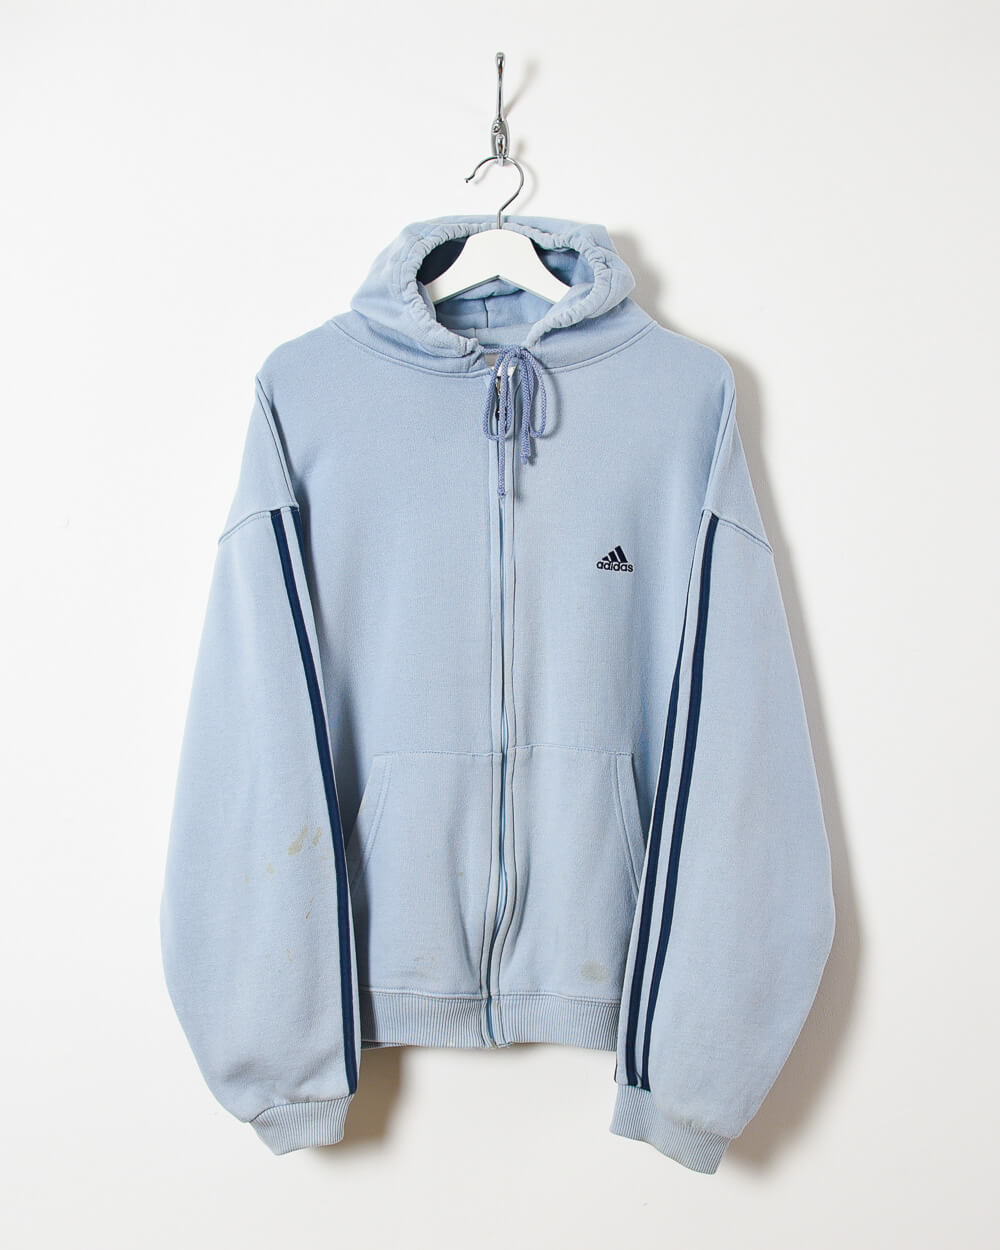 Adidas Women's Hoodie - X-Large - Domno Vintage 90s, 80s, 00s Retro and Vintage Clothing 